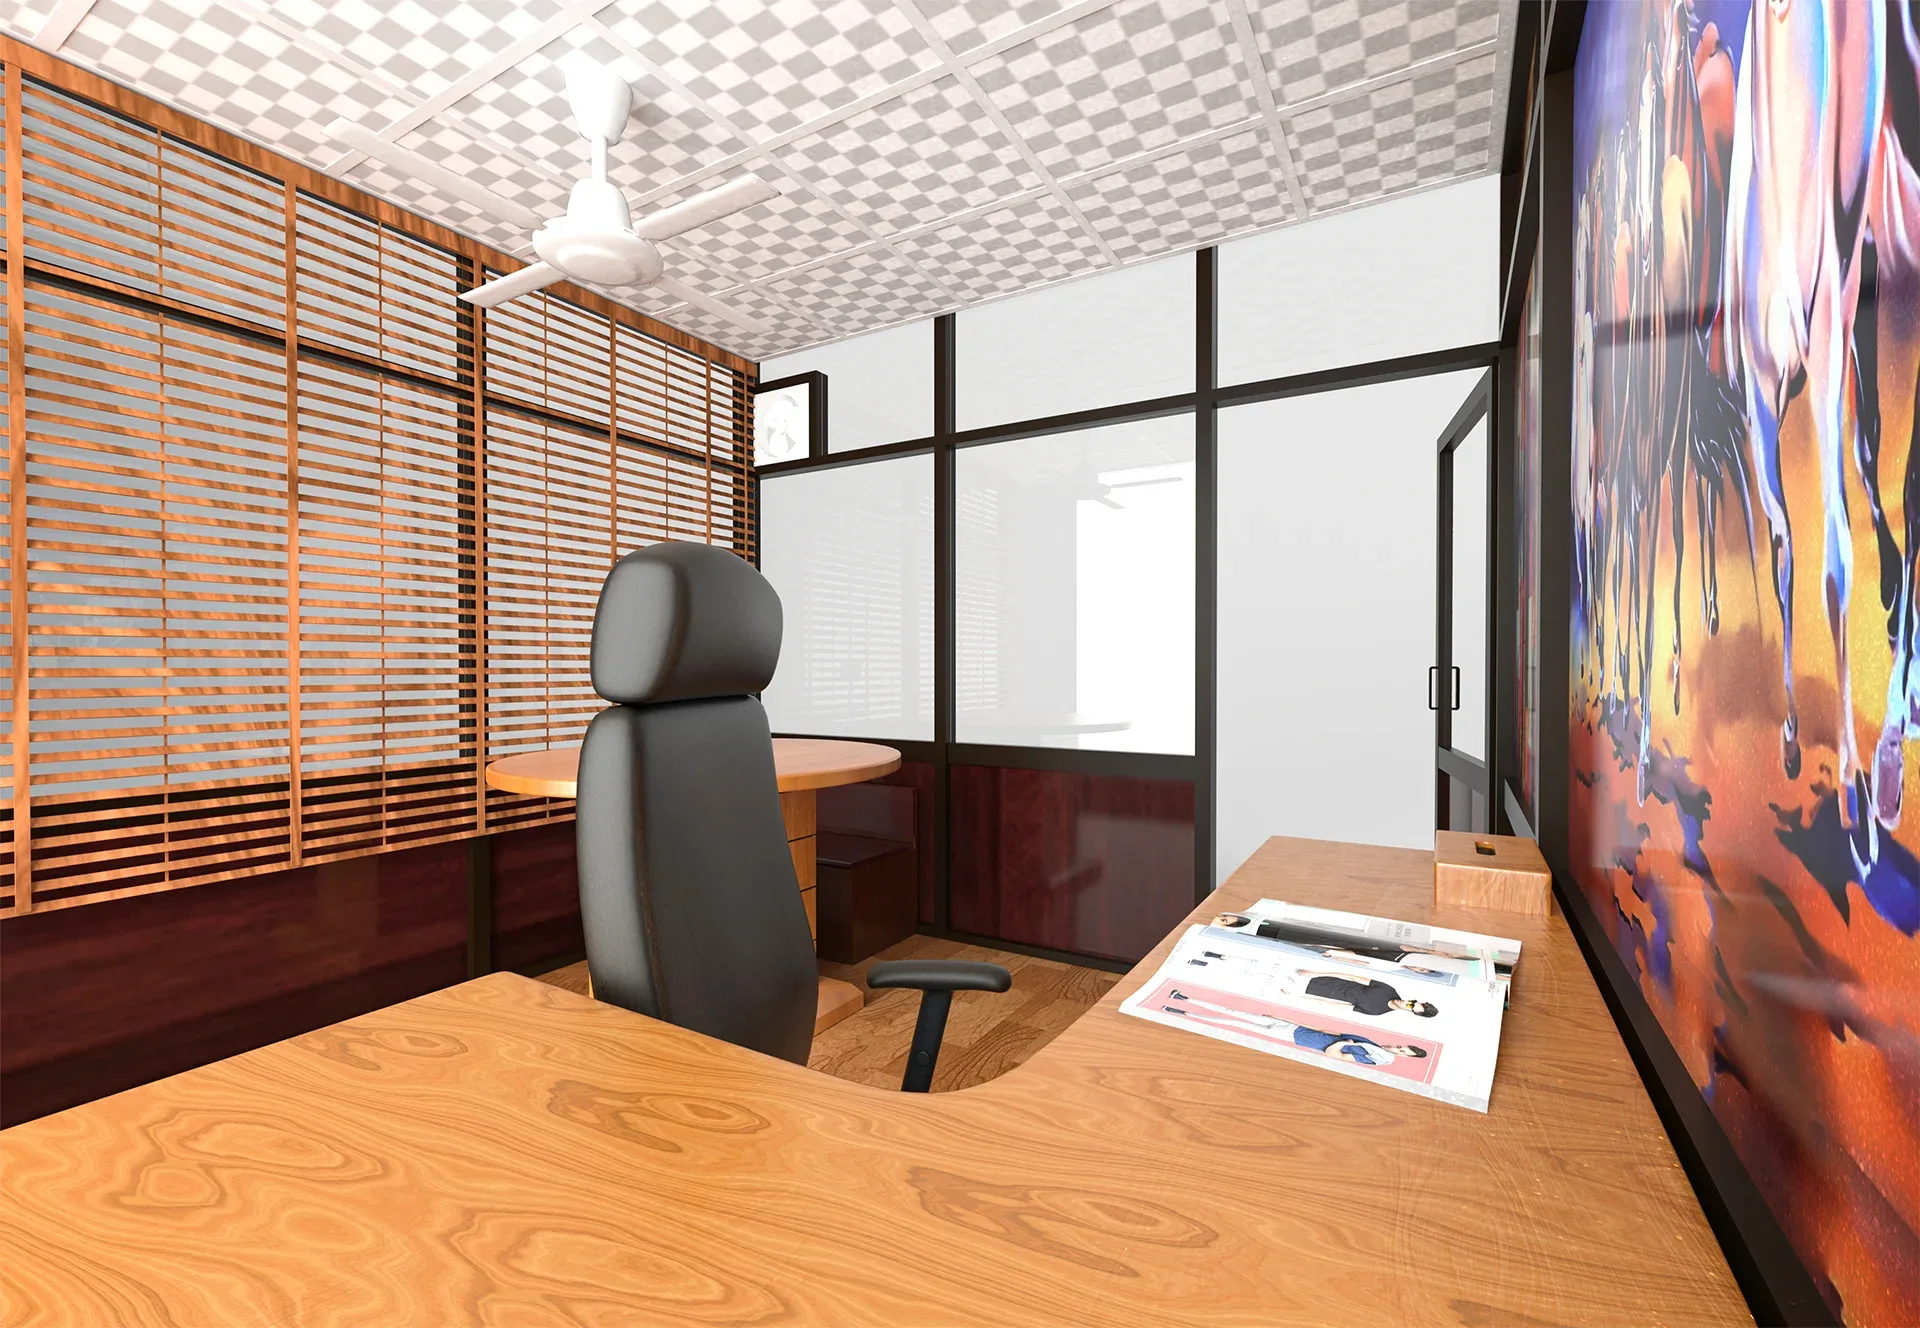 OFFICE CABIN INTERIOR 3D MODEL LOWPOLY